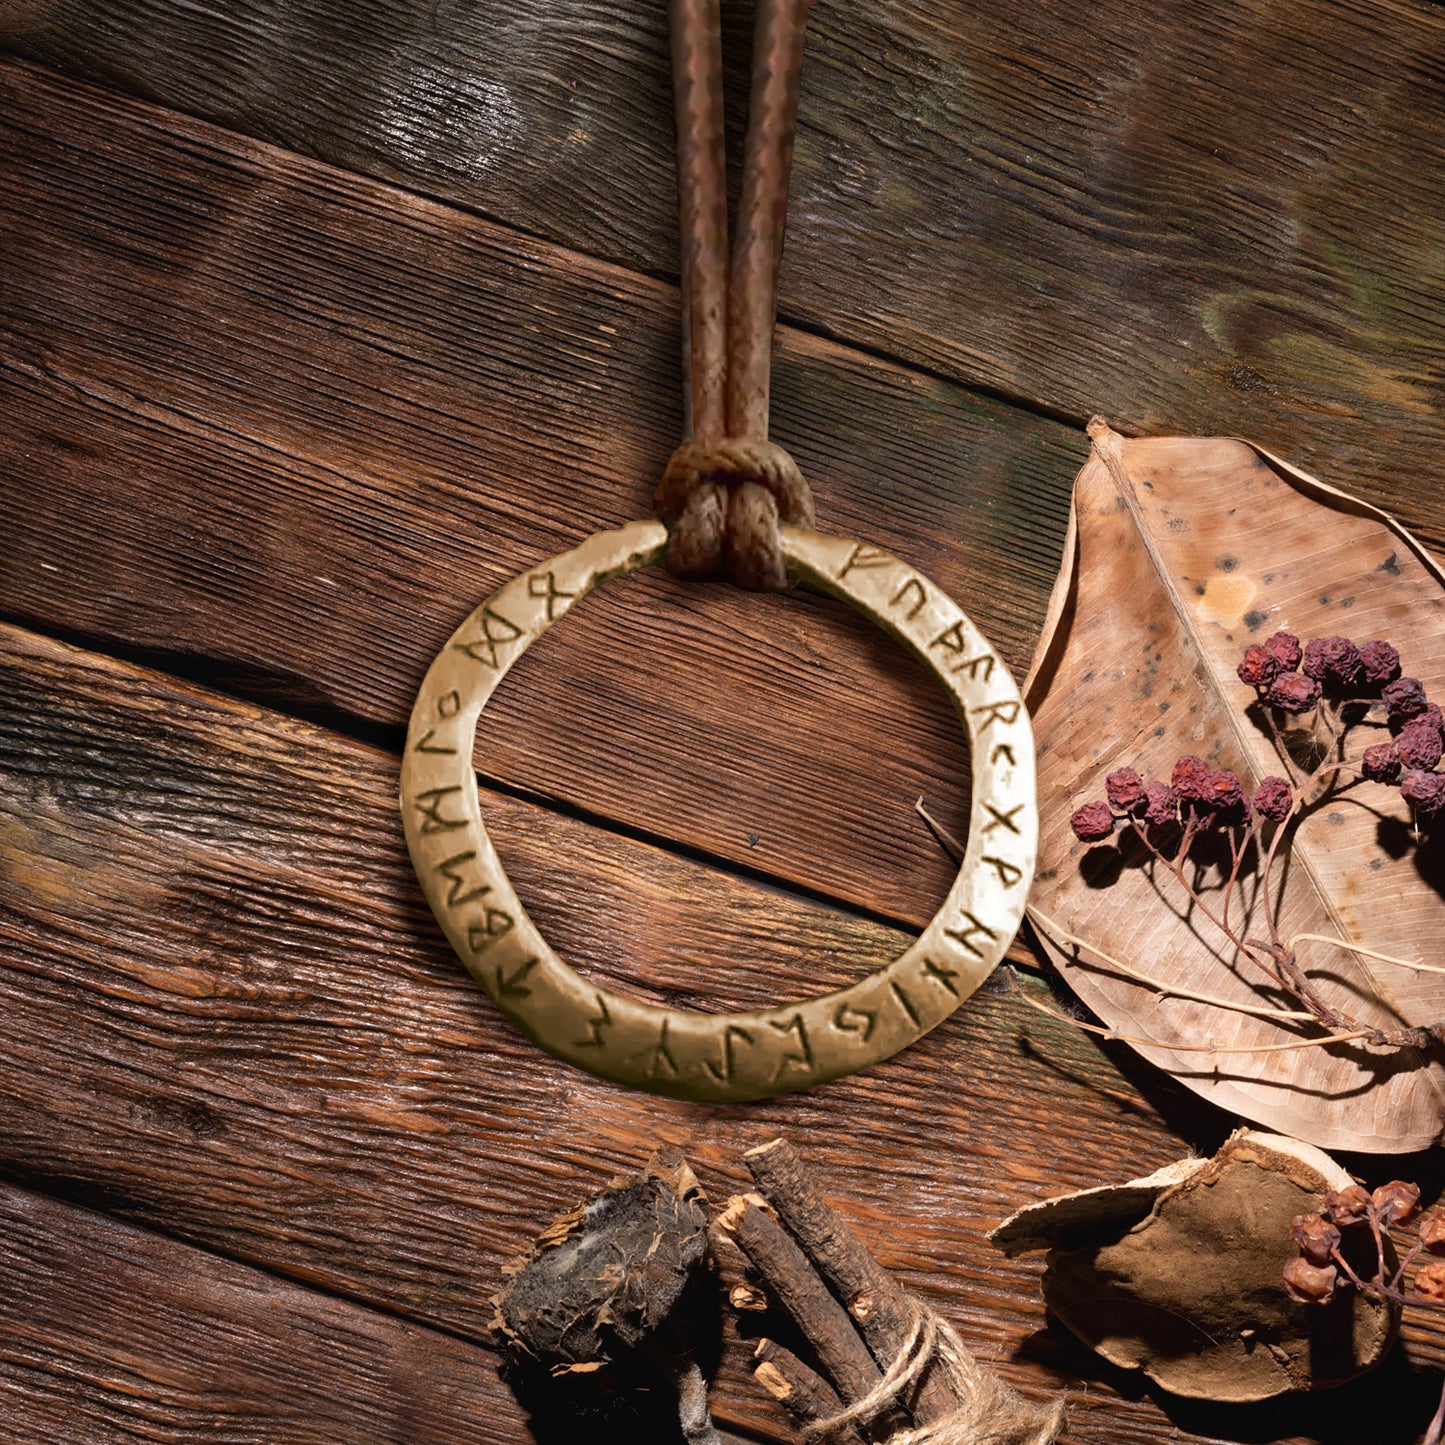 Load image into Gallery viewer, Close up of a brass pendant on a rope necklace, against a wooden tabletop. The pendant is an open circle, with Nordic runes printed around the edge. Next to the pendant are dried leaves and berries.
